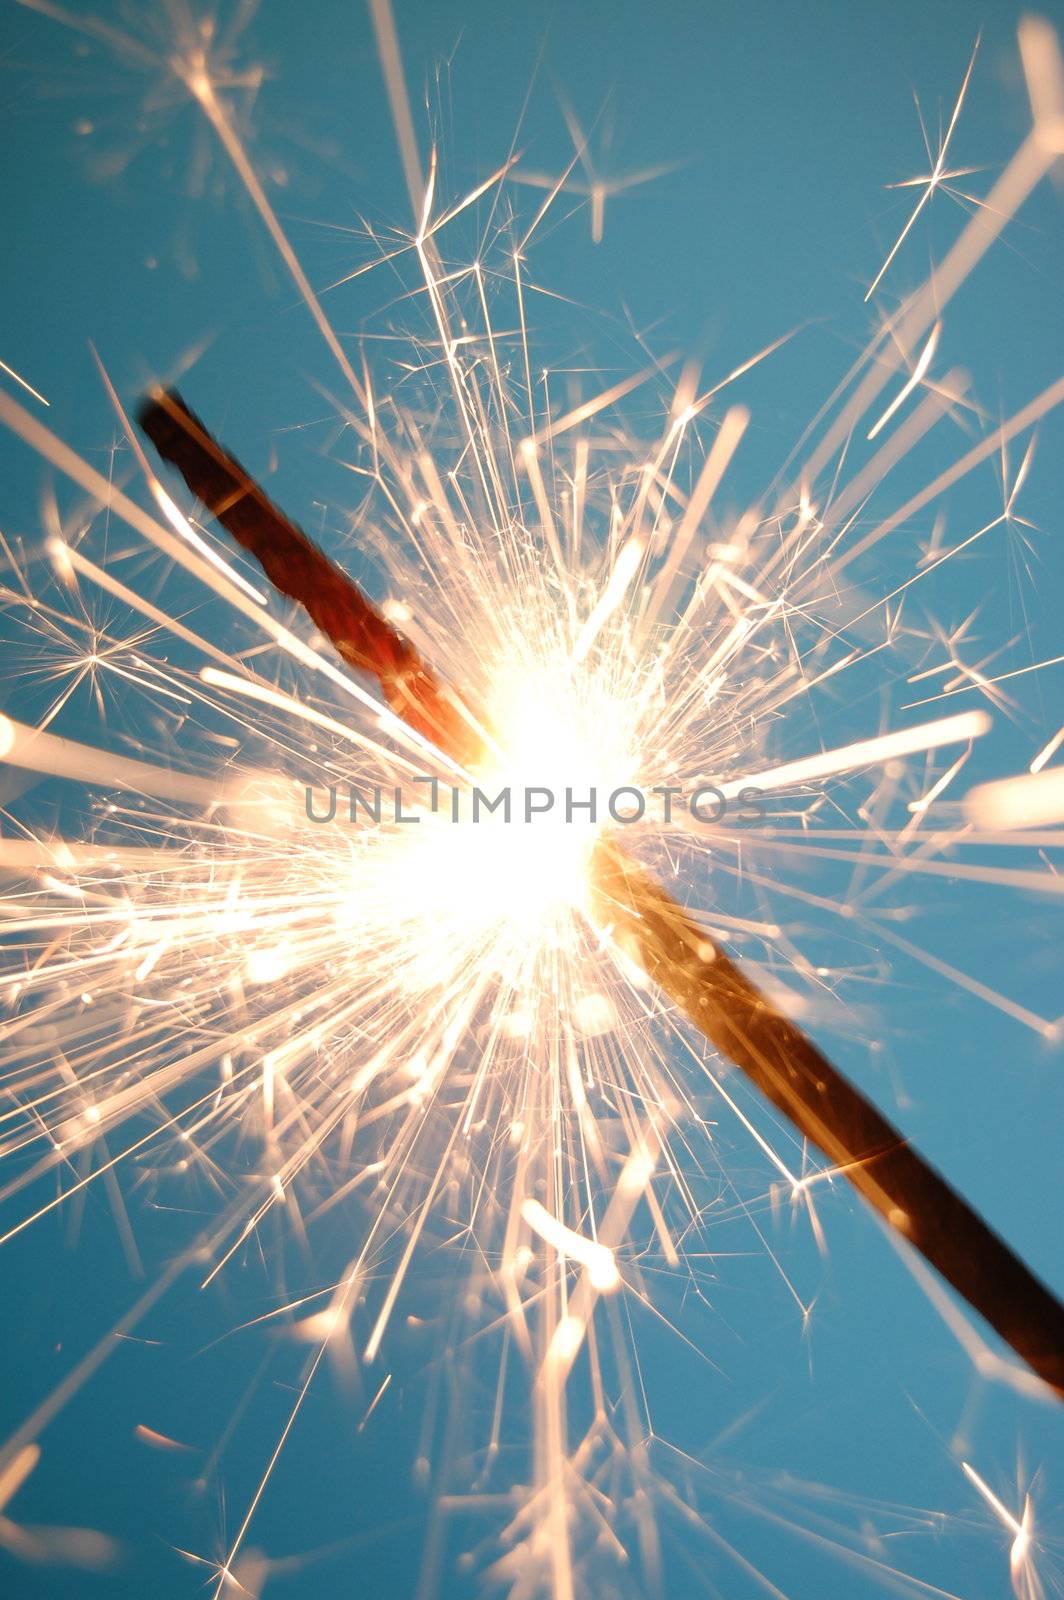 abstract holiday sparkler background with copyspace for text message